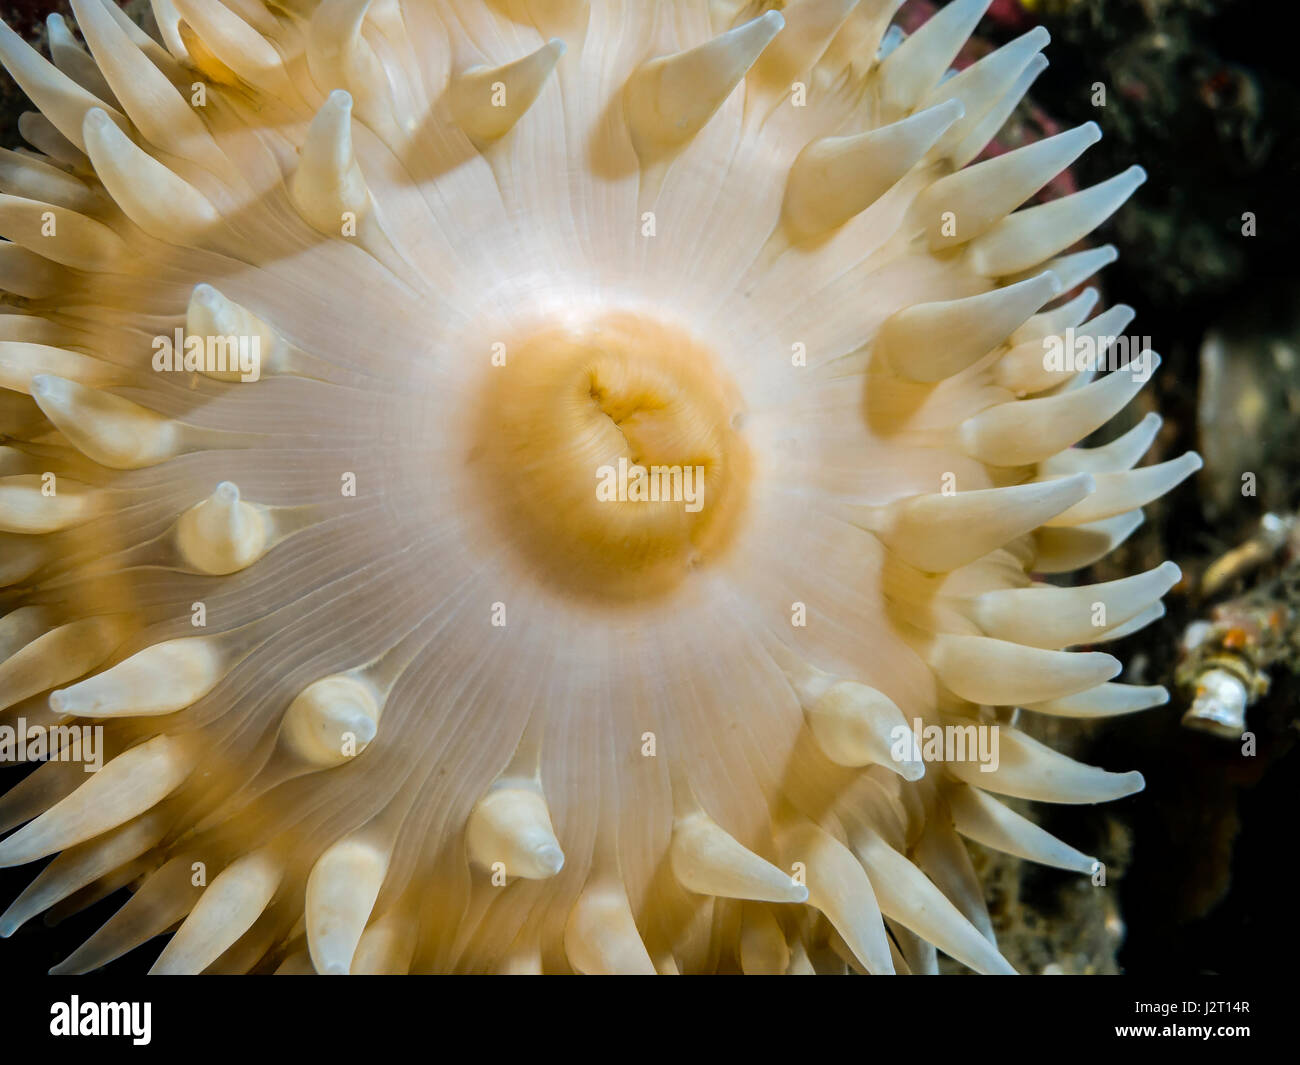 A wild Sea Anemone photographed while scuba diving in the cold Pacific waters of British Columbia. Stock Photo